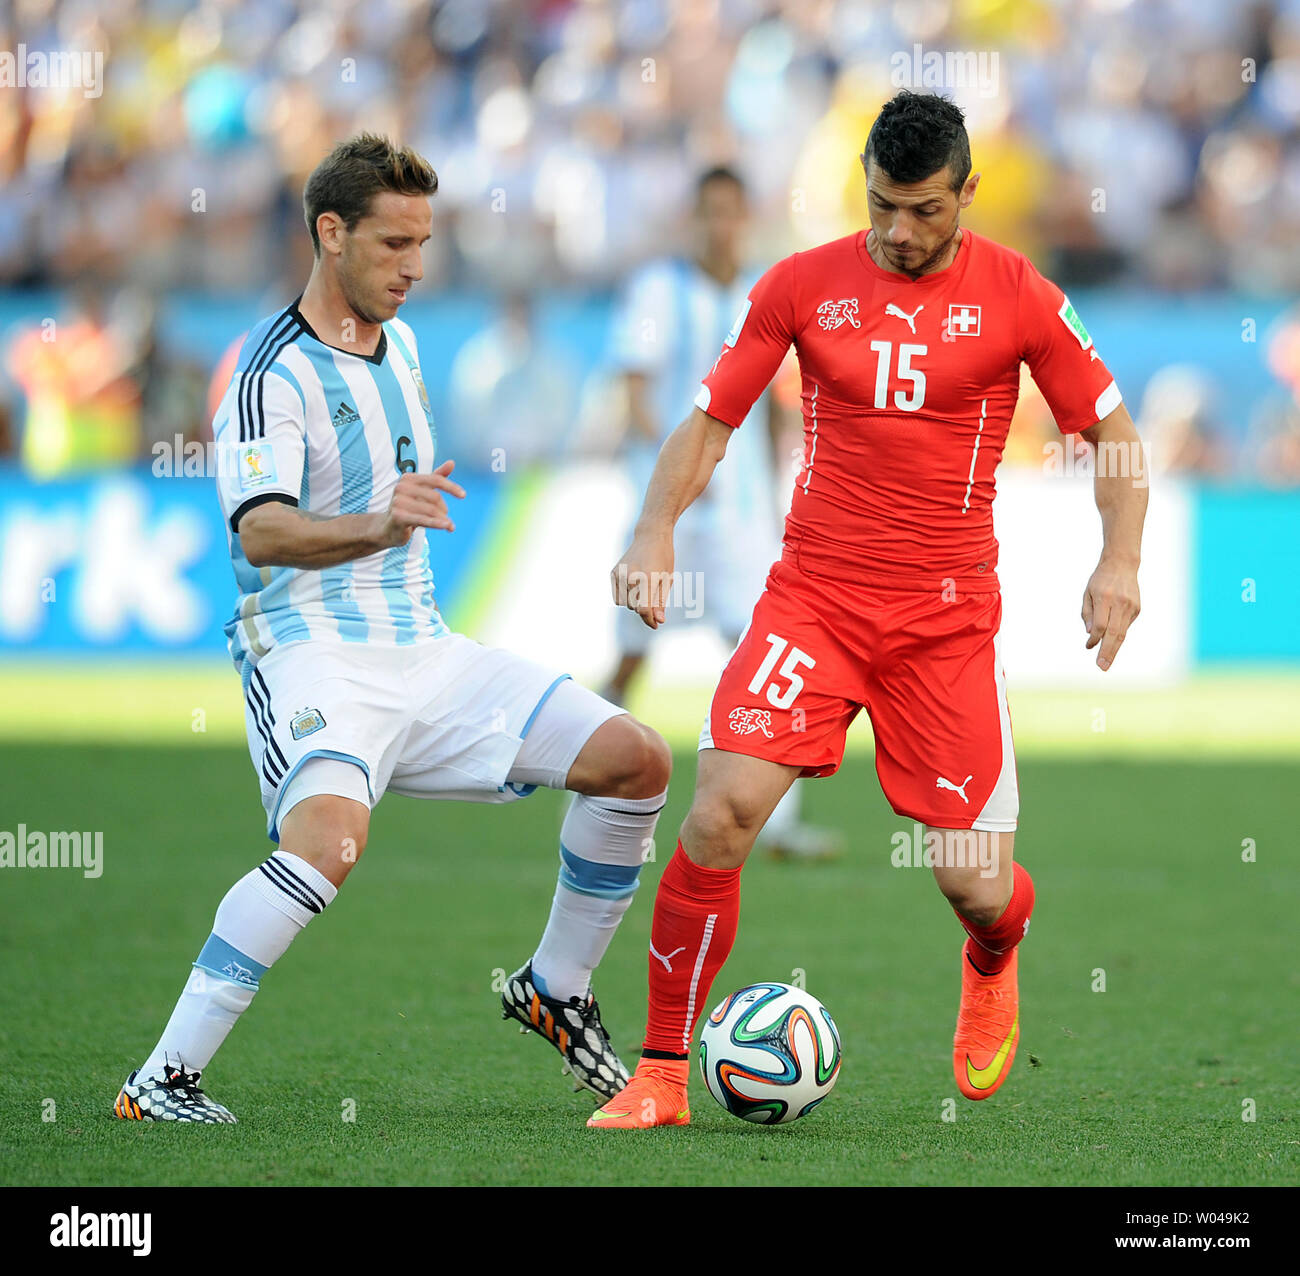 Lucas Biglia (L) of Argentina competes with Blerim Dzemaili of Switzerland during the 2014 FIFA World Cup Round of 16 match at the Arena Corinthians in Sao Paulo, Brazil on July 01, 2014. UPI/Chris Brunskill Stock Photo